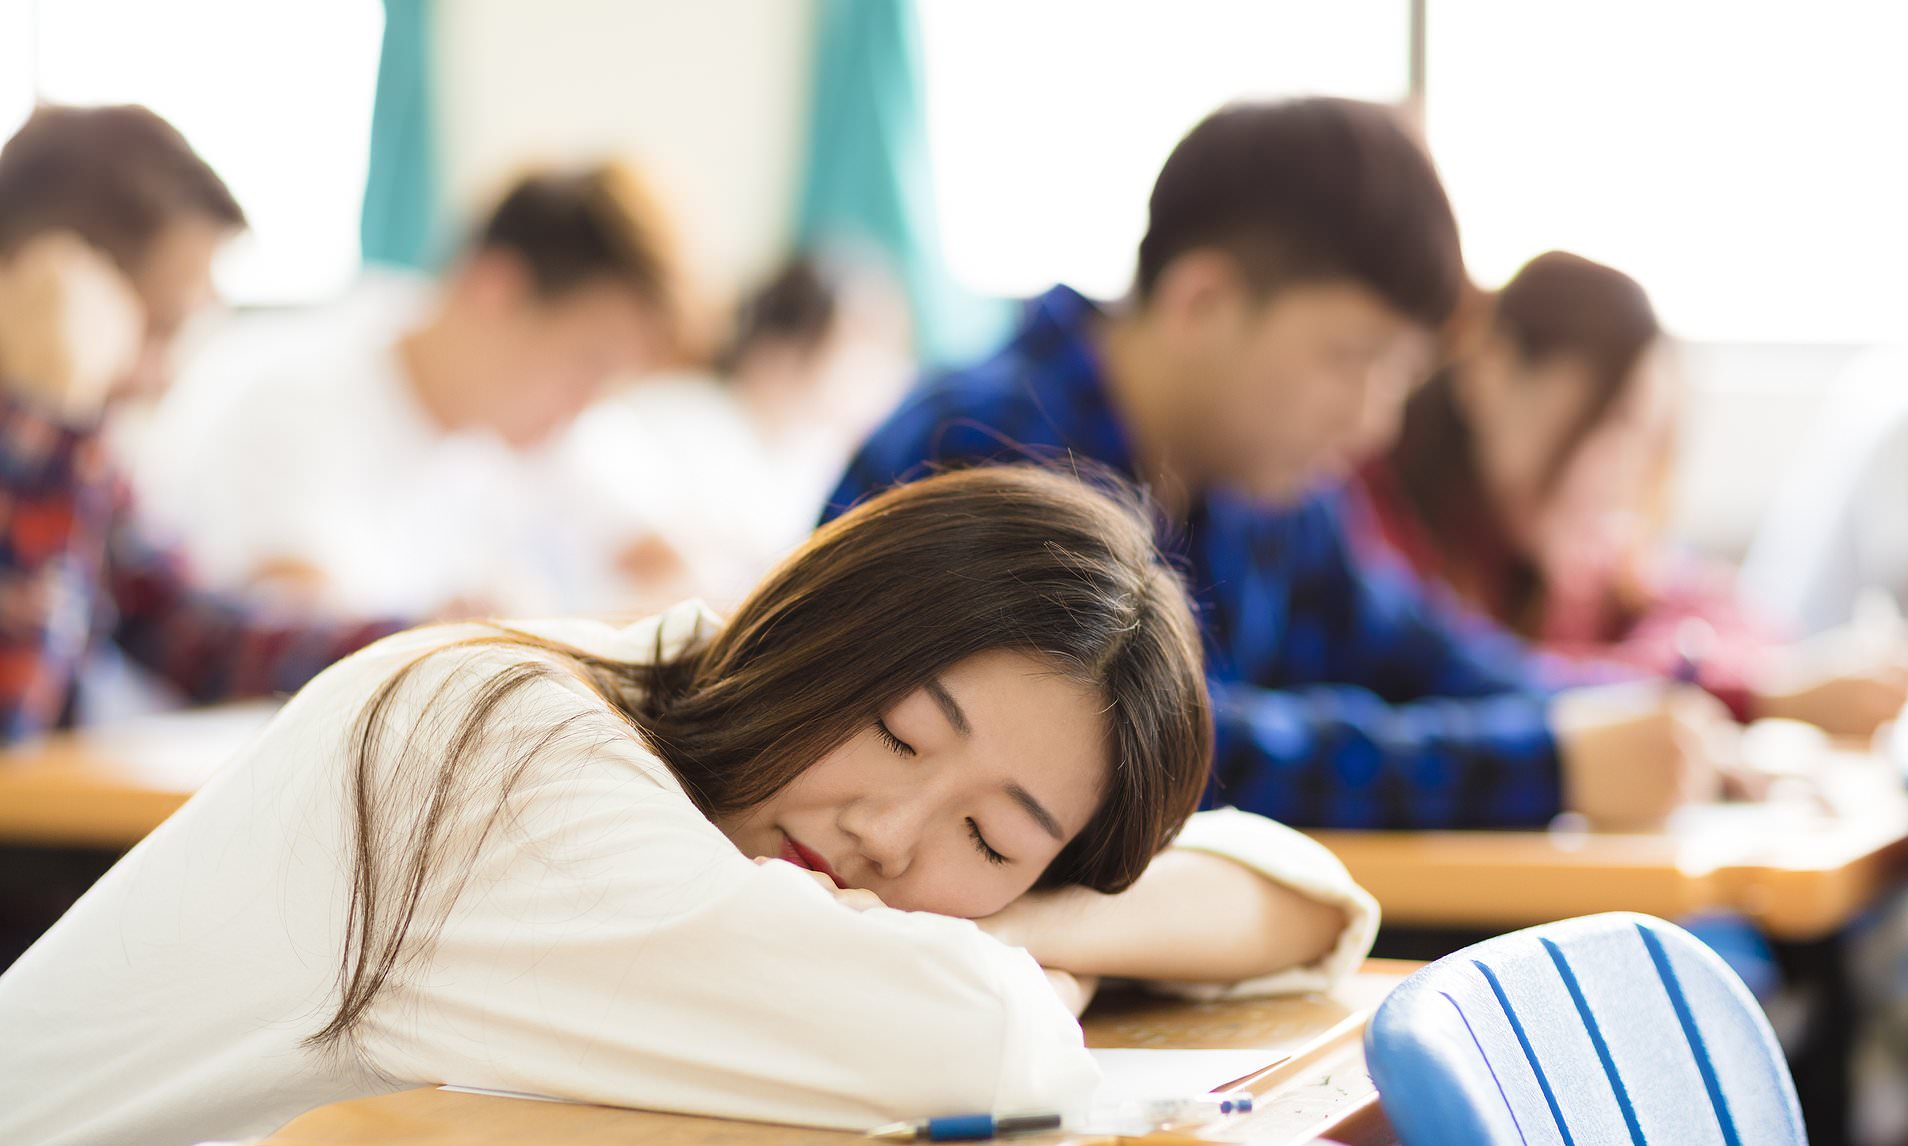  Insufficient sleep can negatively impact grades